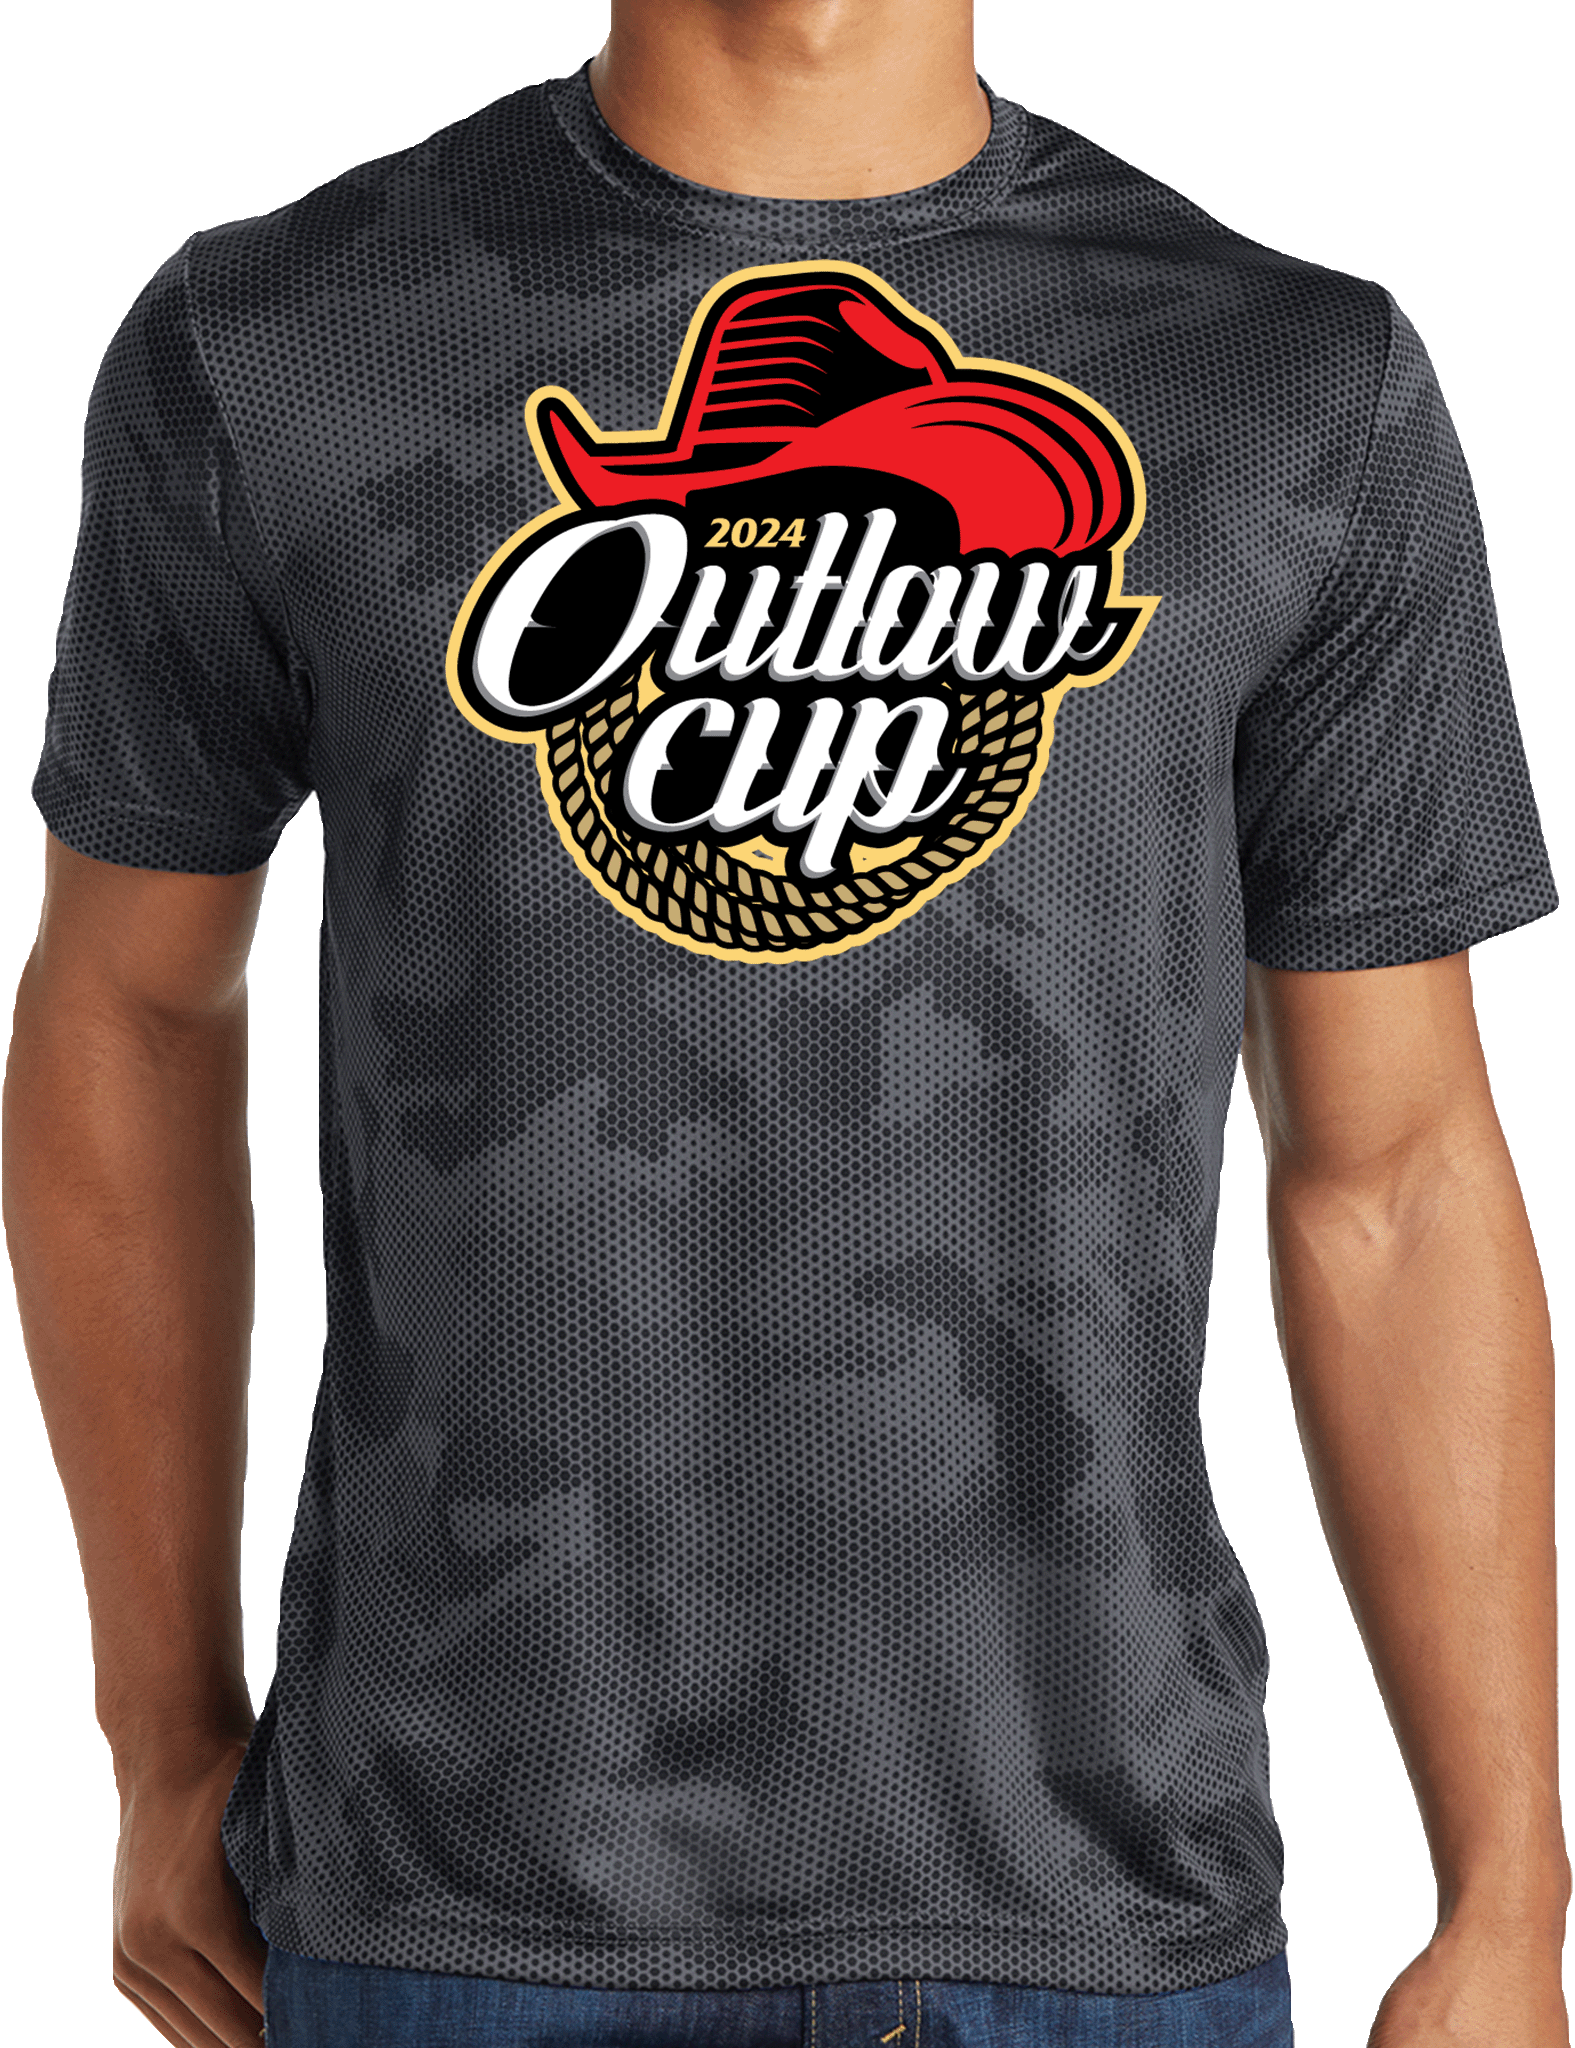 Performance Shirts - 2024 Outlaw Cup